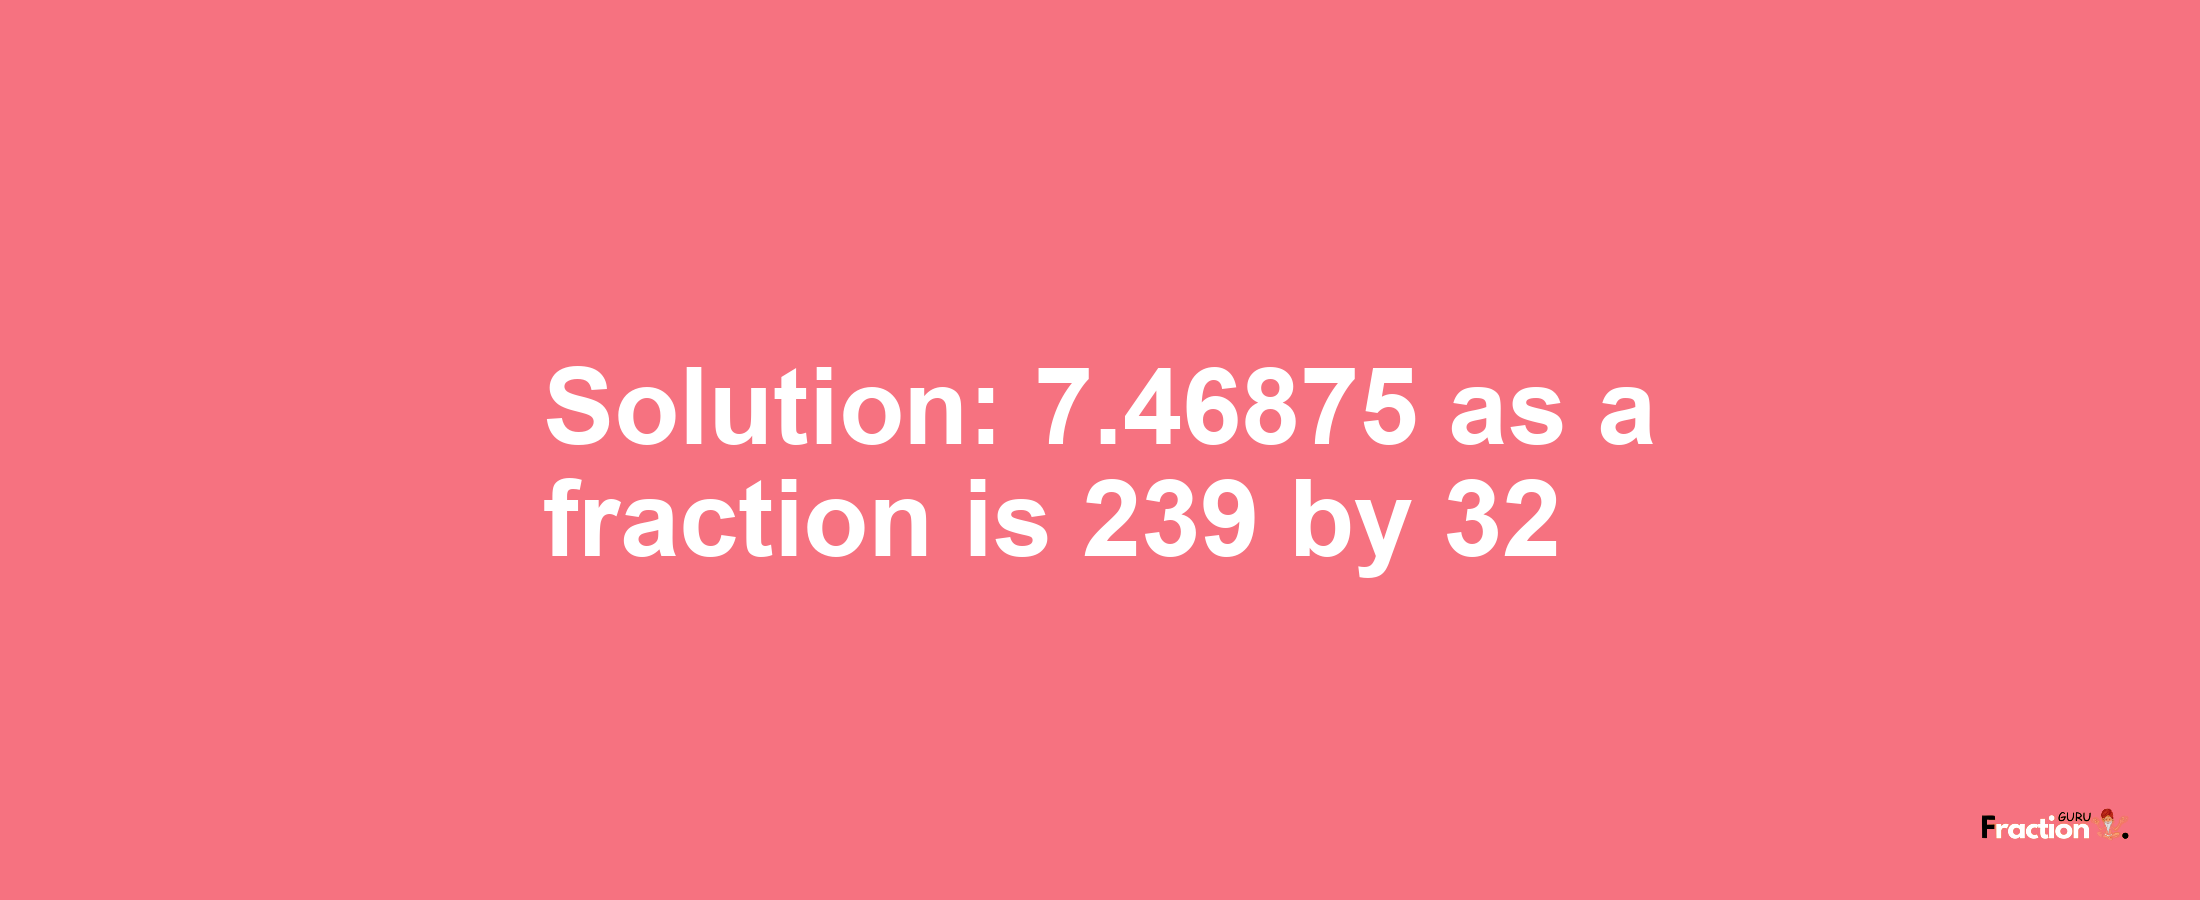 Solution:7.46875 as a fraction is 239/32